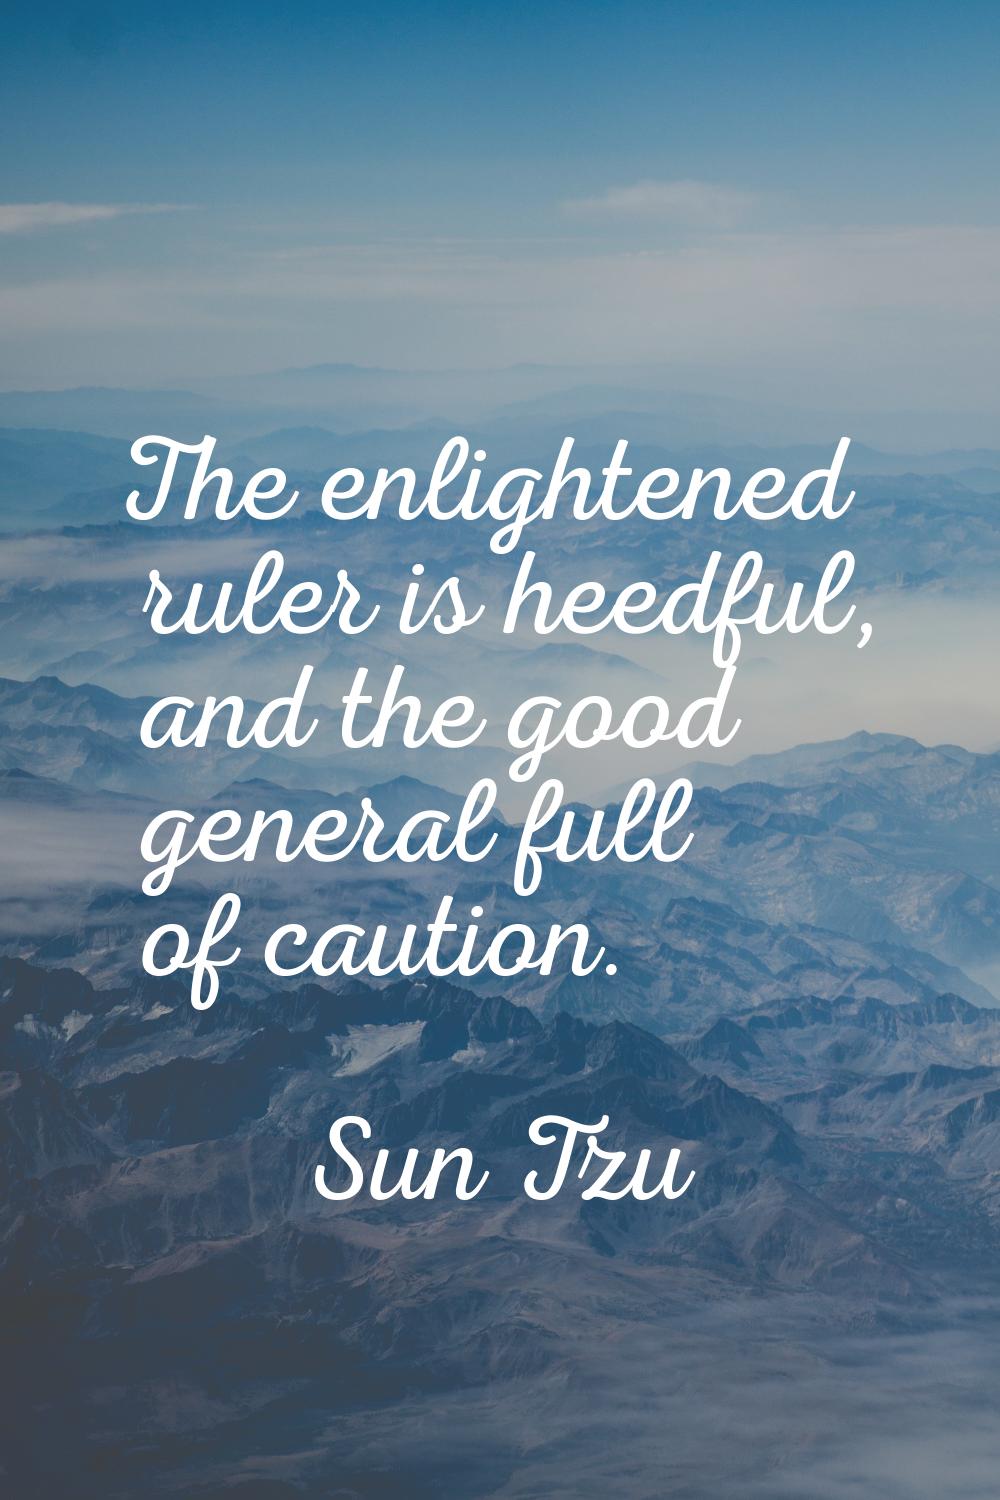 The enlightened ruler is heedful, and the good general full of caution.